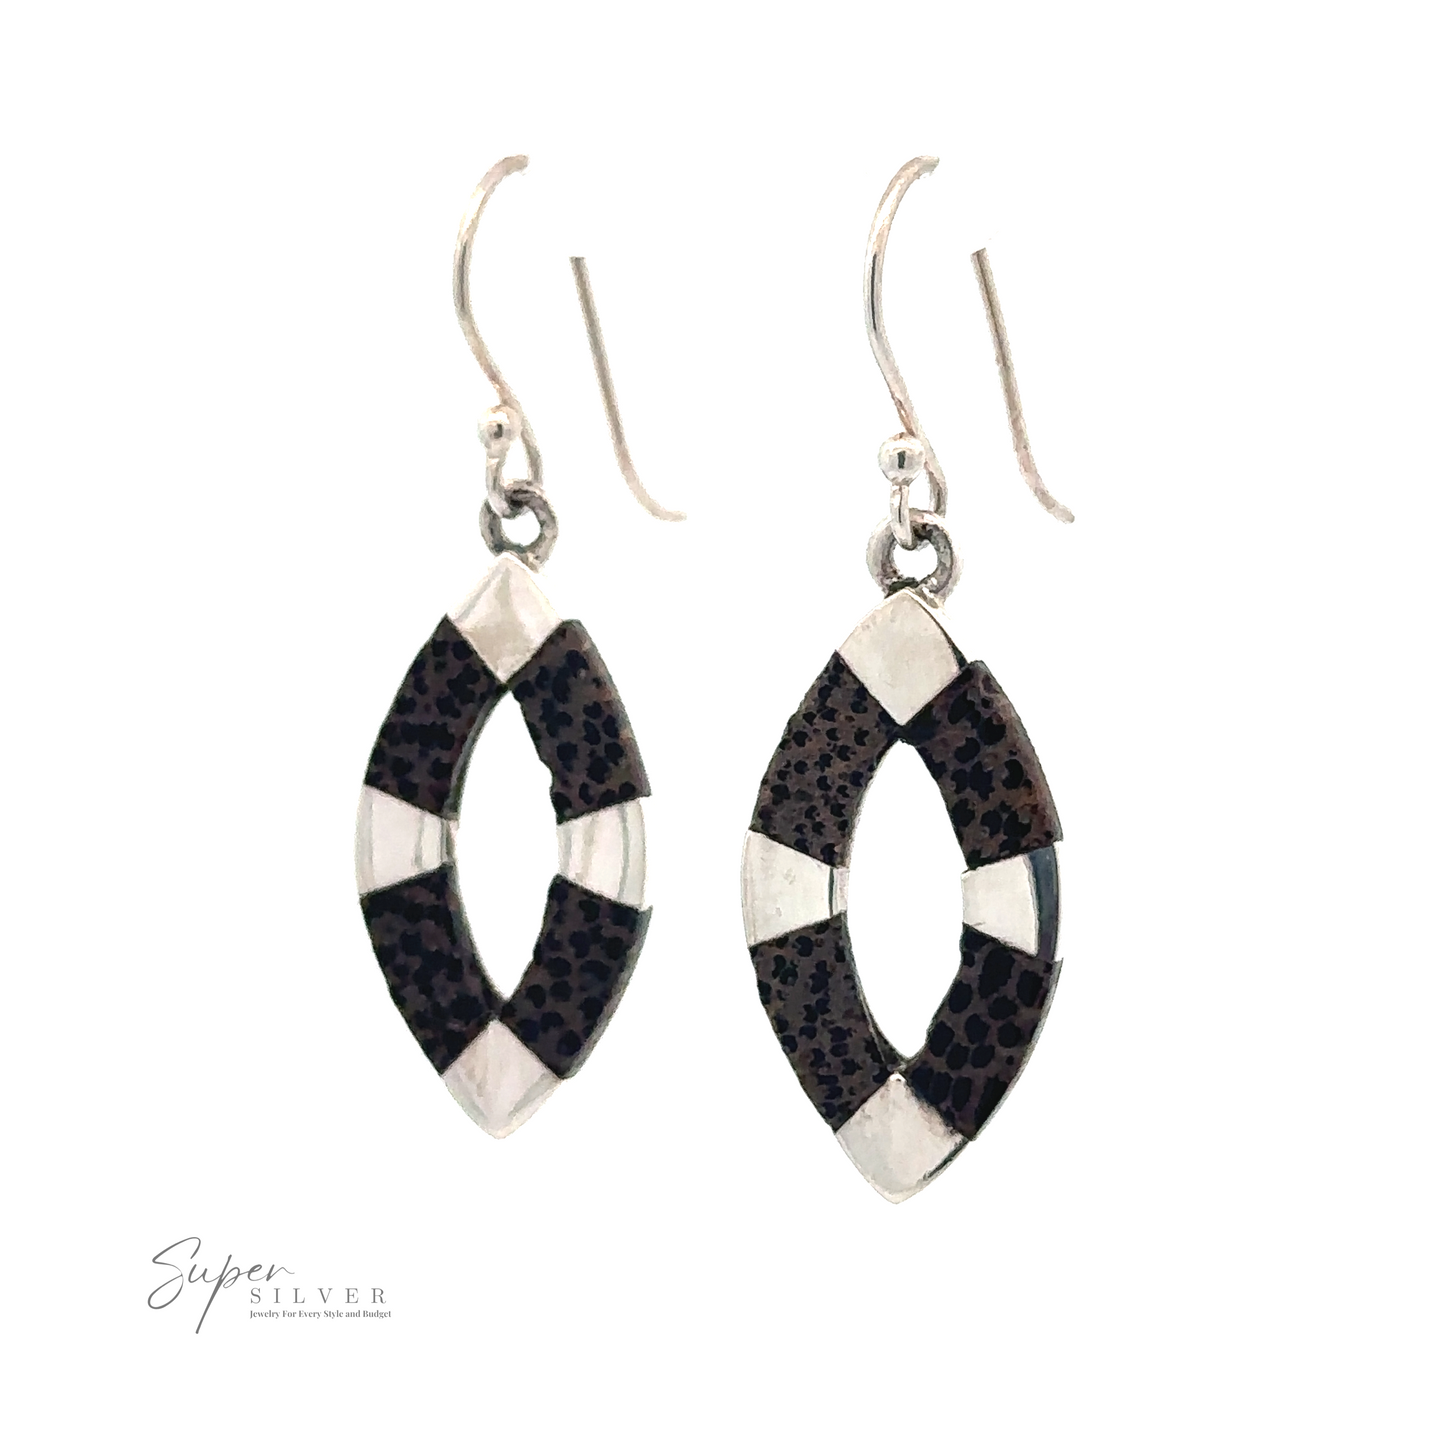 A pair of Inlaid Marquise Dangle Earrings featuring a marquise shape with alternating black and white speckled segments, reminiscent of petrified wood jewelry. The earrings have hook fastenings.